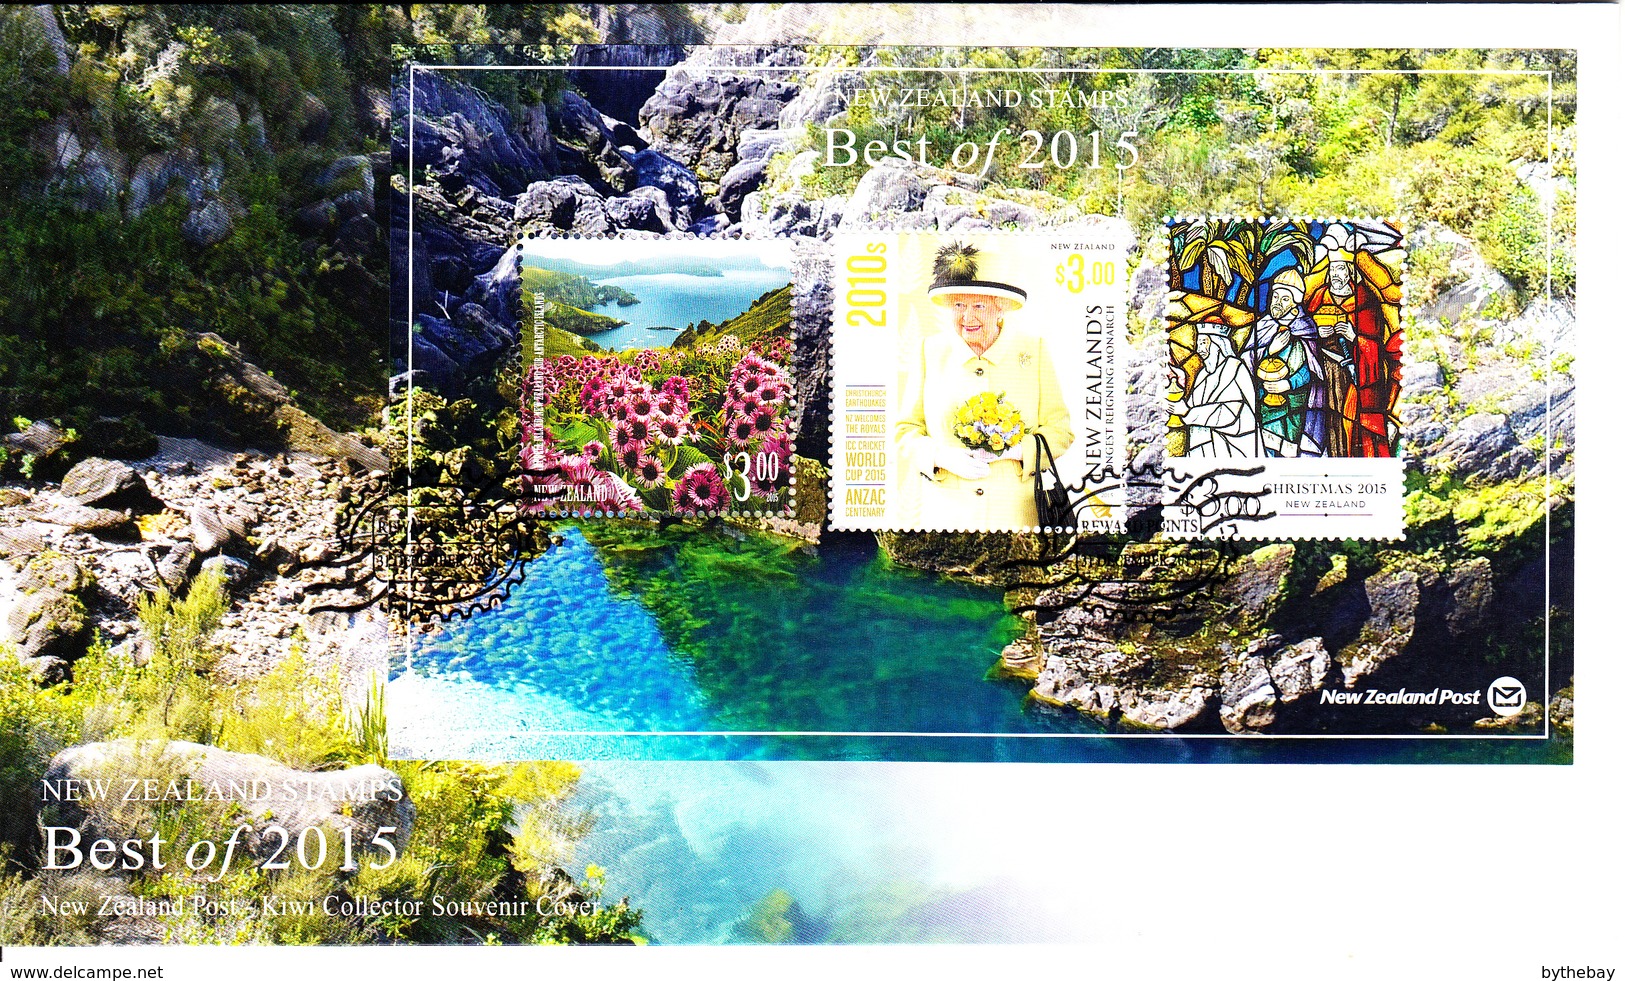 New Zealand Set Of 3 'Best Of 2015' Stamp Rewards Miniature Sheet On Covers Dated December 31, 2015 - Covers & Documents